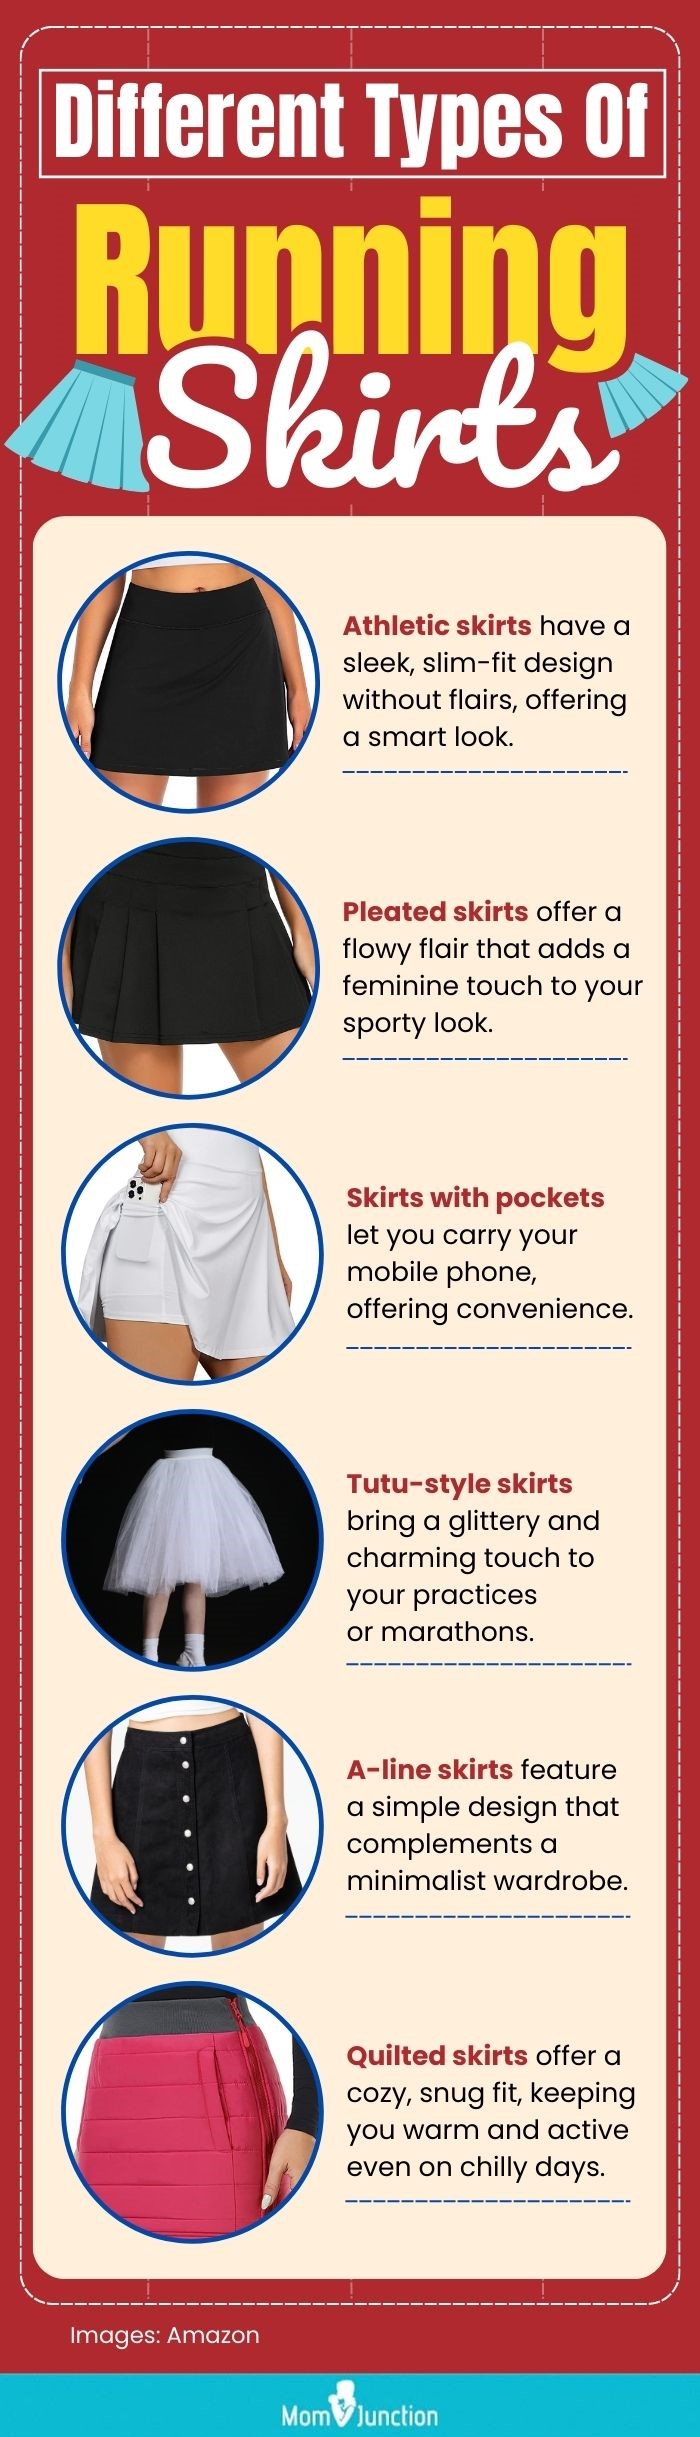 Different Types Of Running Skirts (infographic)